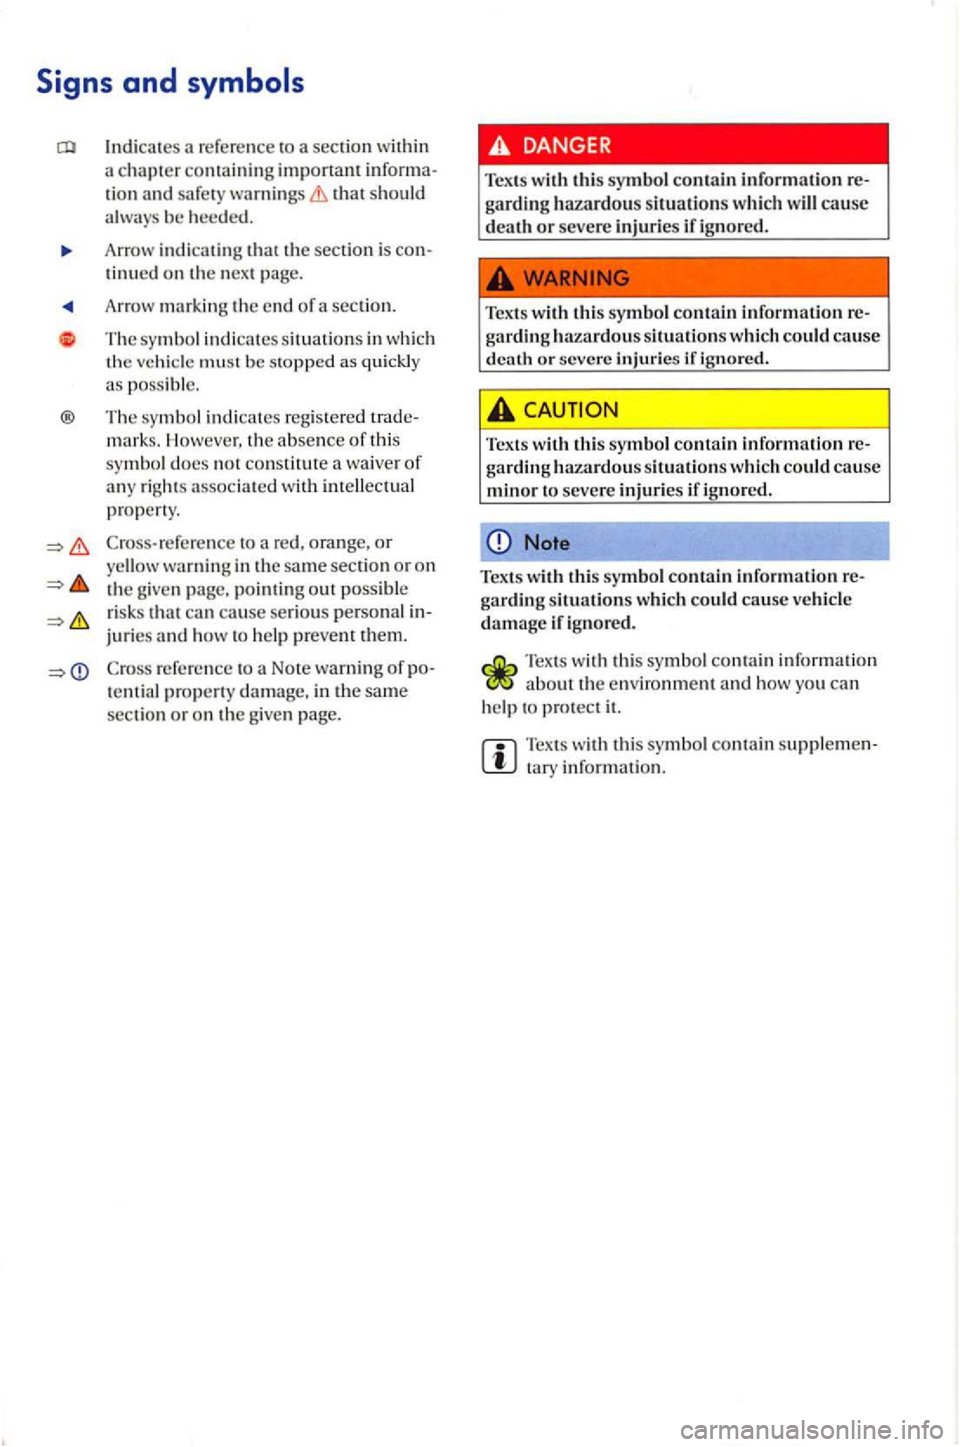 VOLKSWAGEN GOLF PLUS 2012  Owners Manual Indicates a  re fe rence  to  a section within a chapter c ontaining important tion and safe ty warnings that should a lways be heeded. 
Arrow  indicating that the section is tinued on th e nex t page